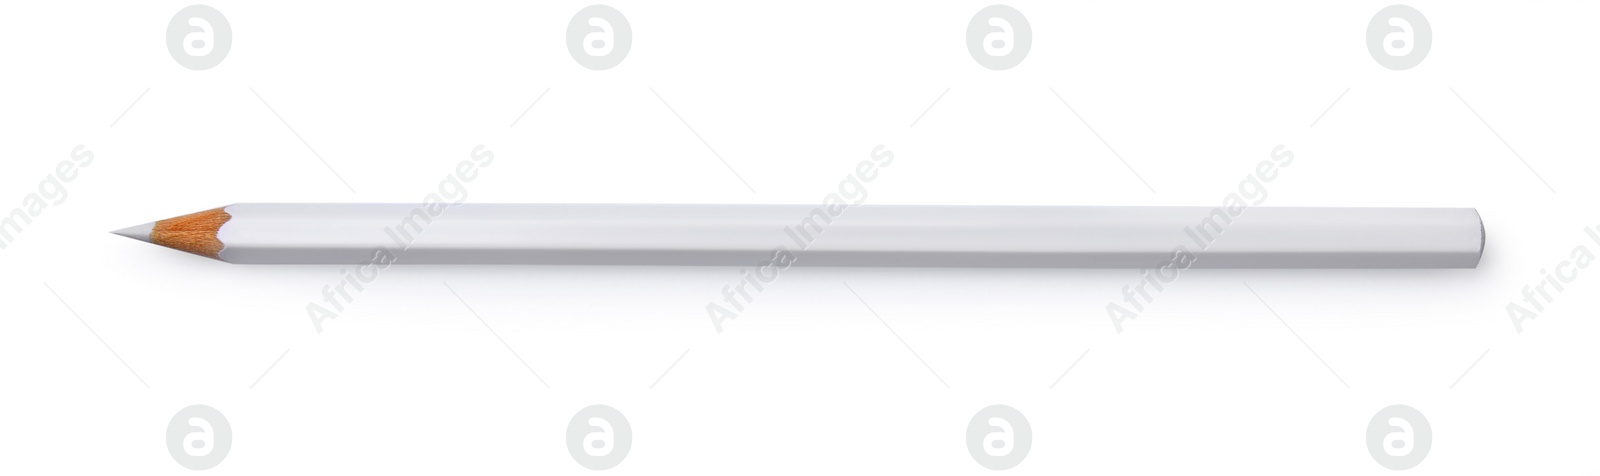 Photo of New sharp wooden pencil isolated on white